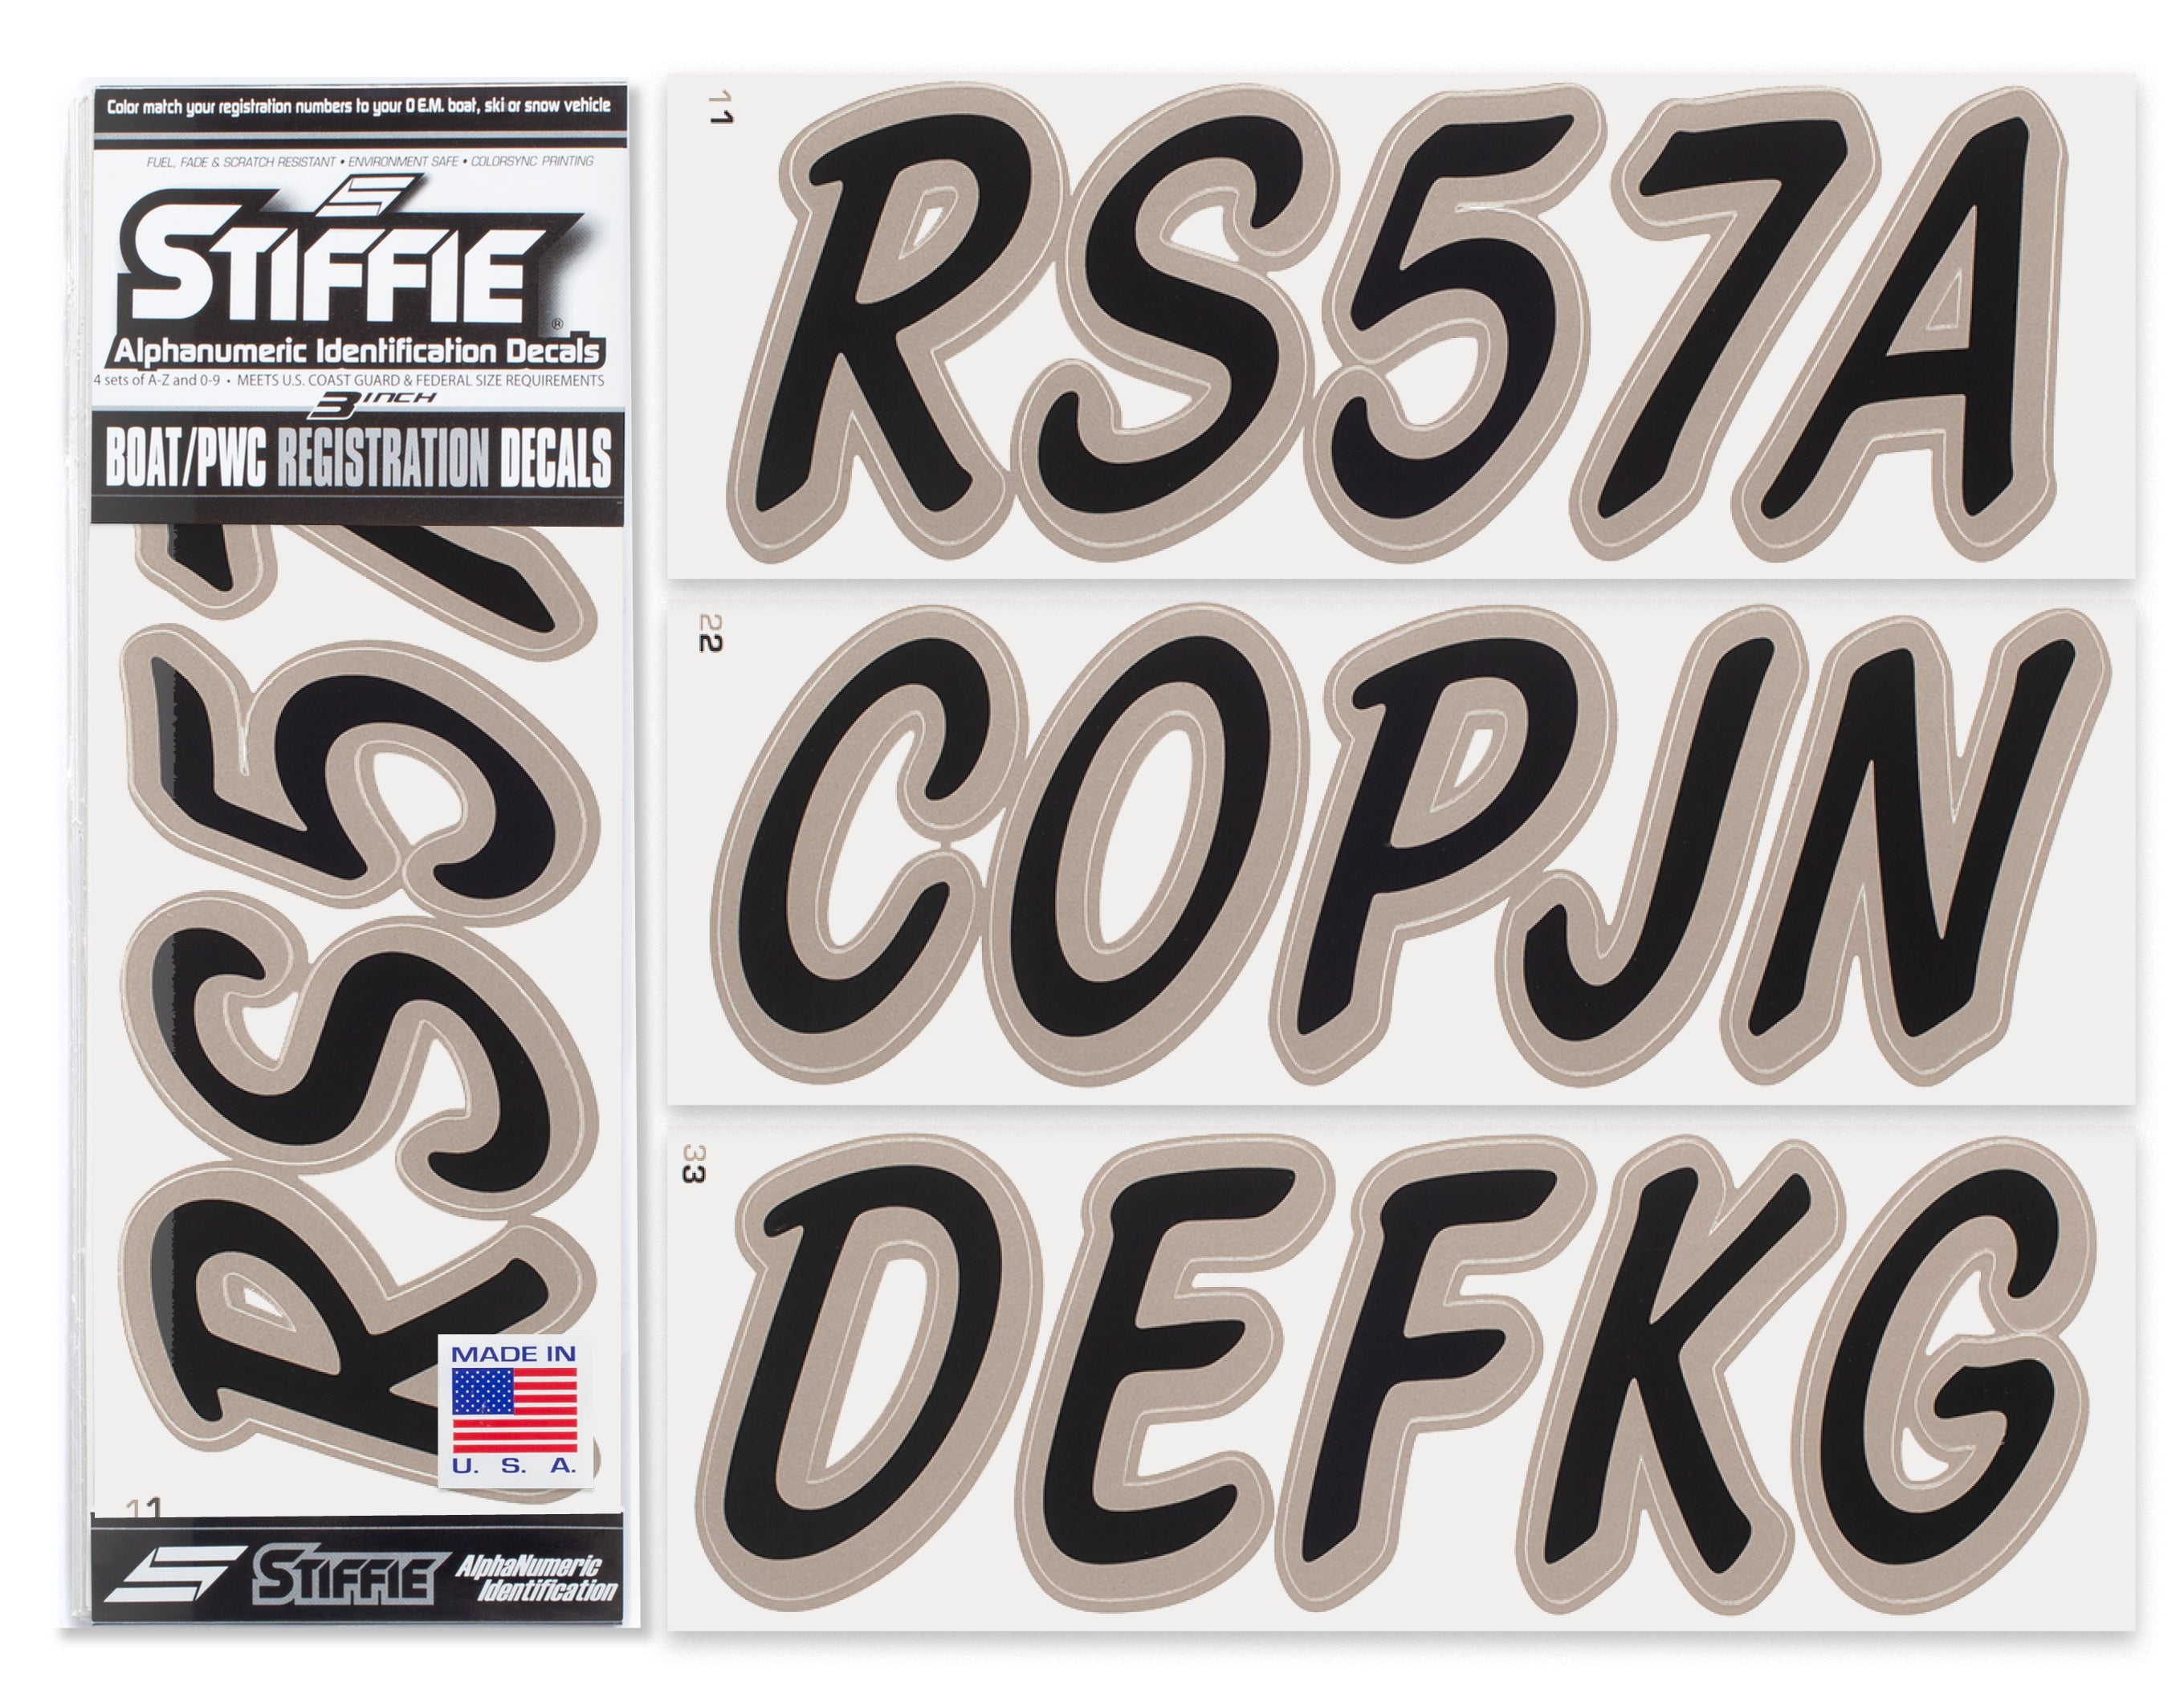 STIFFIE Whipline Solid Black/Pewter 3" Alpha-Numeric Registration Identification Numbers Stickers Decals for Boats & Personal Watercraft